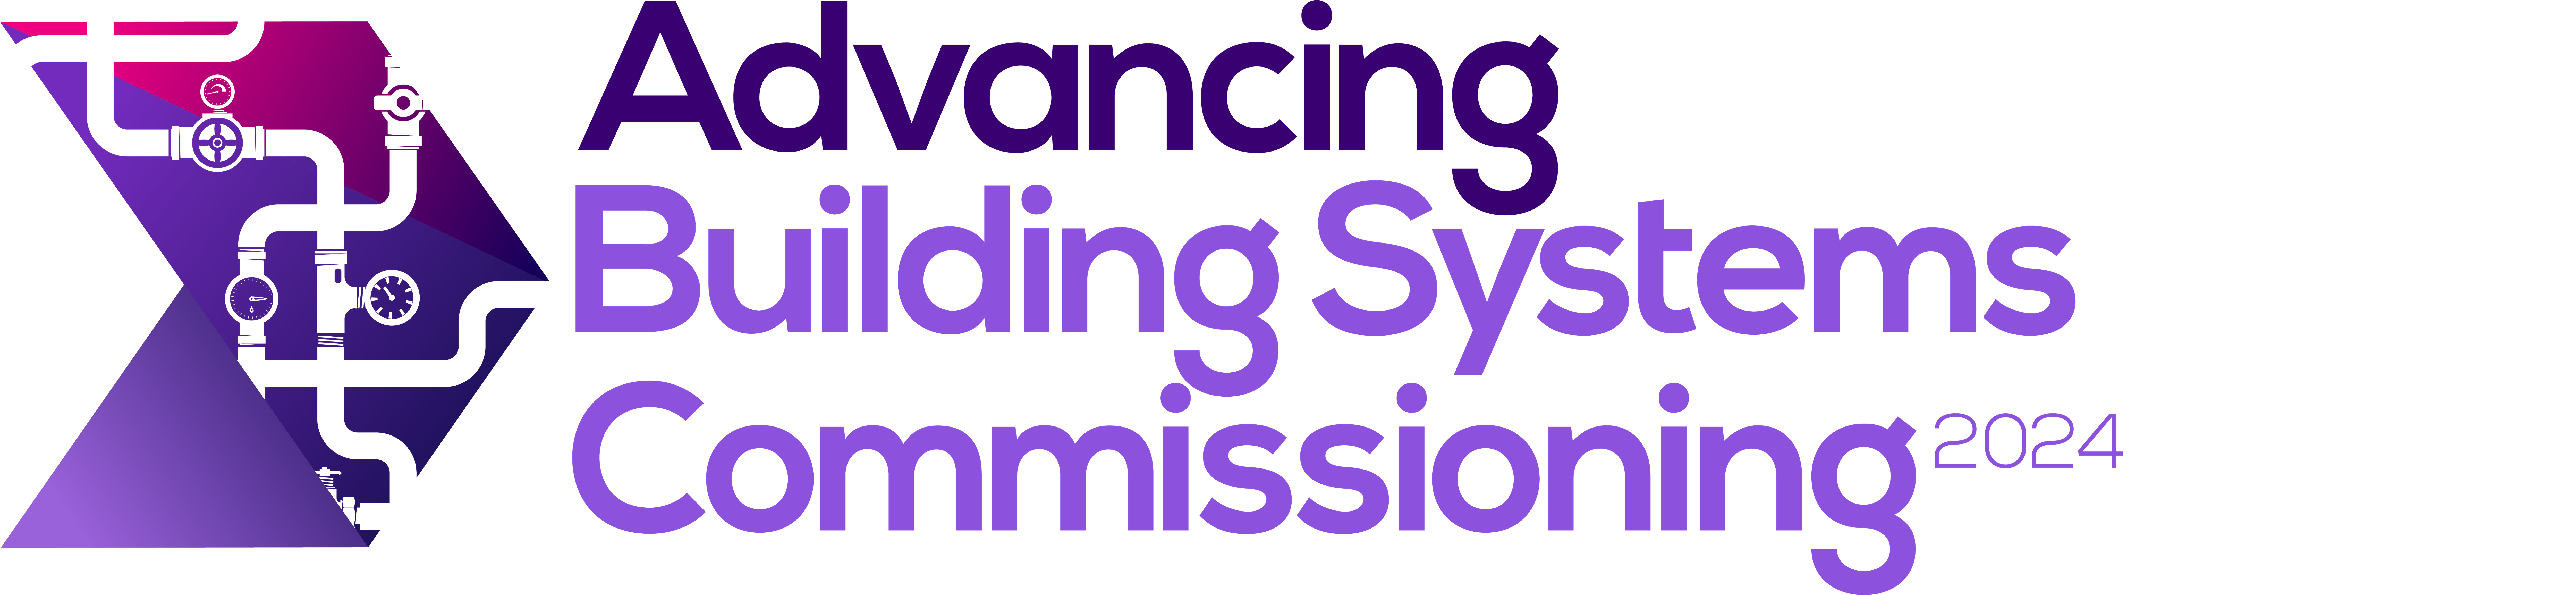 Advancing Building Systems Commissioning Logo